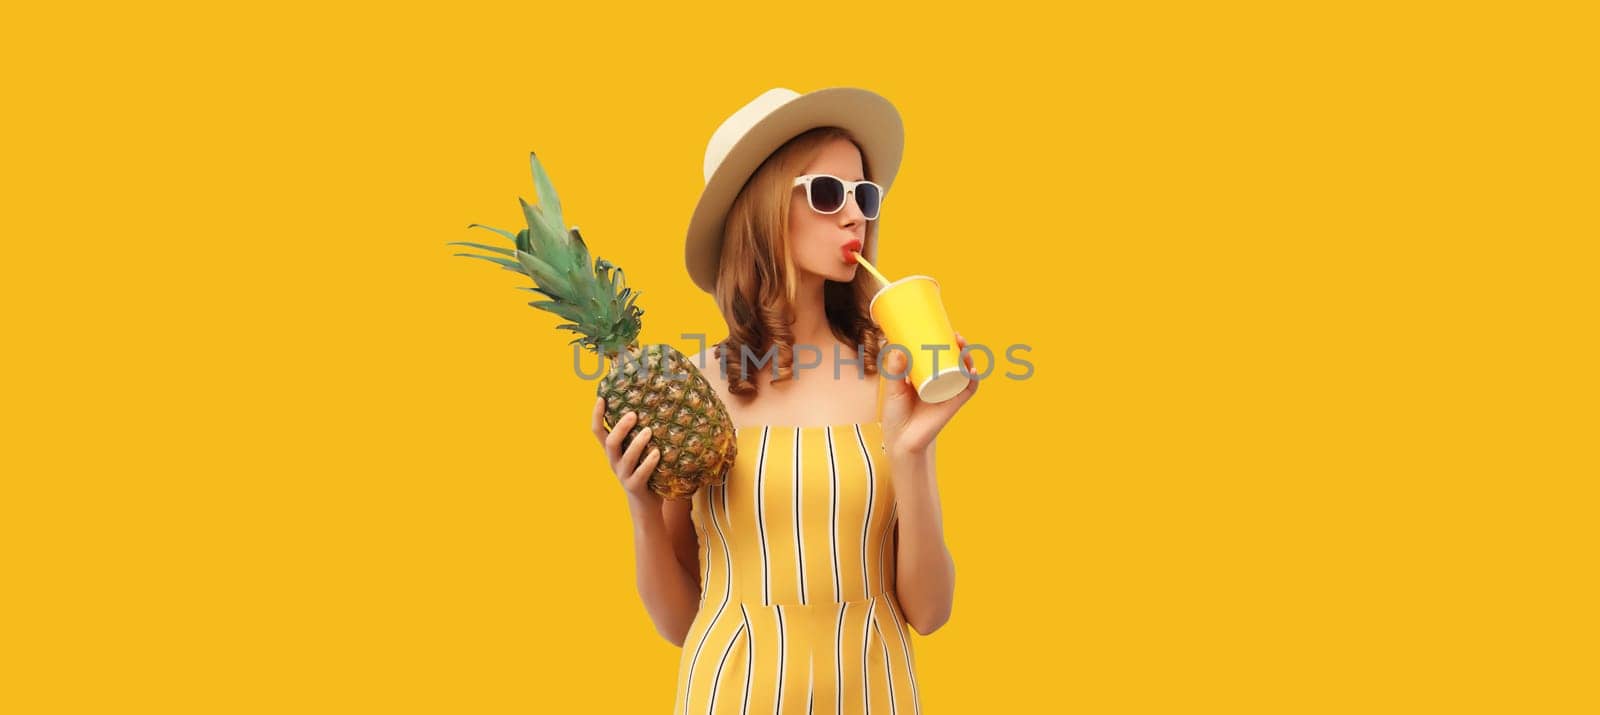 Summer bright portrait of stylish young woman drinking fresh juice holding pineapple fruit in straw hat, sunglasses on colorful yellow studio background